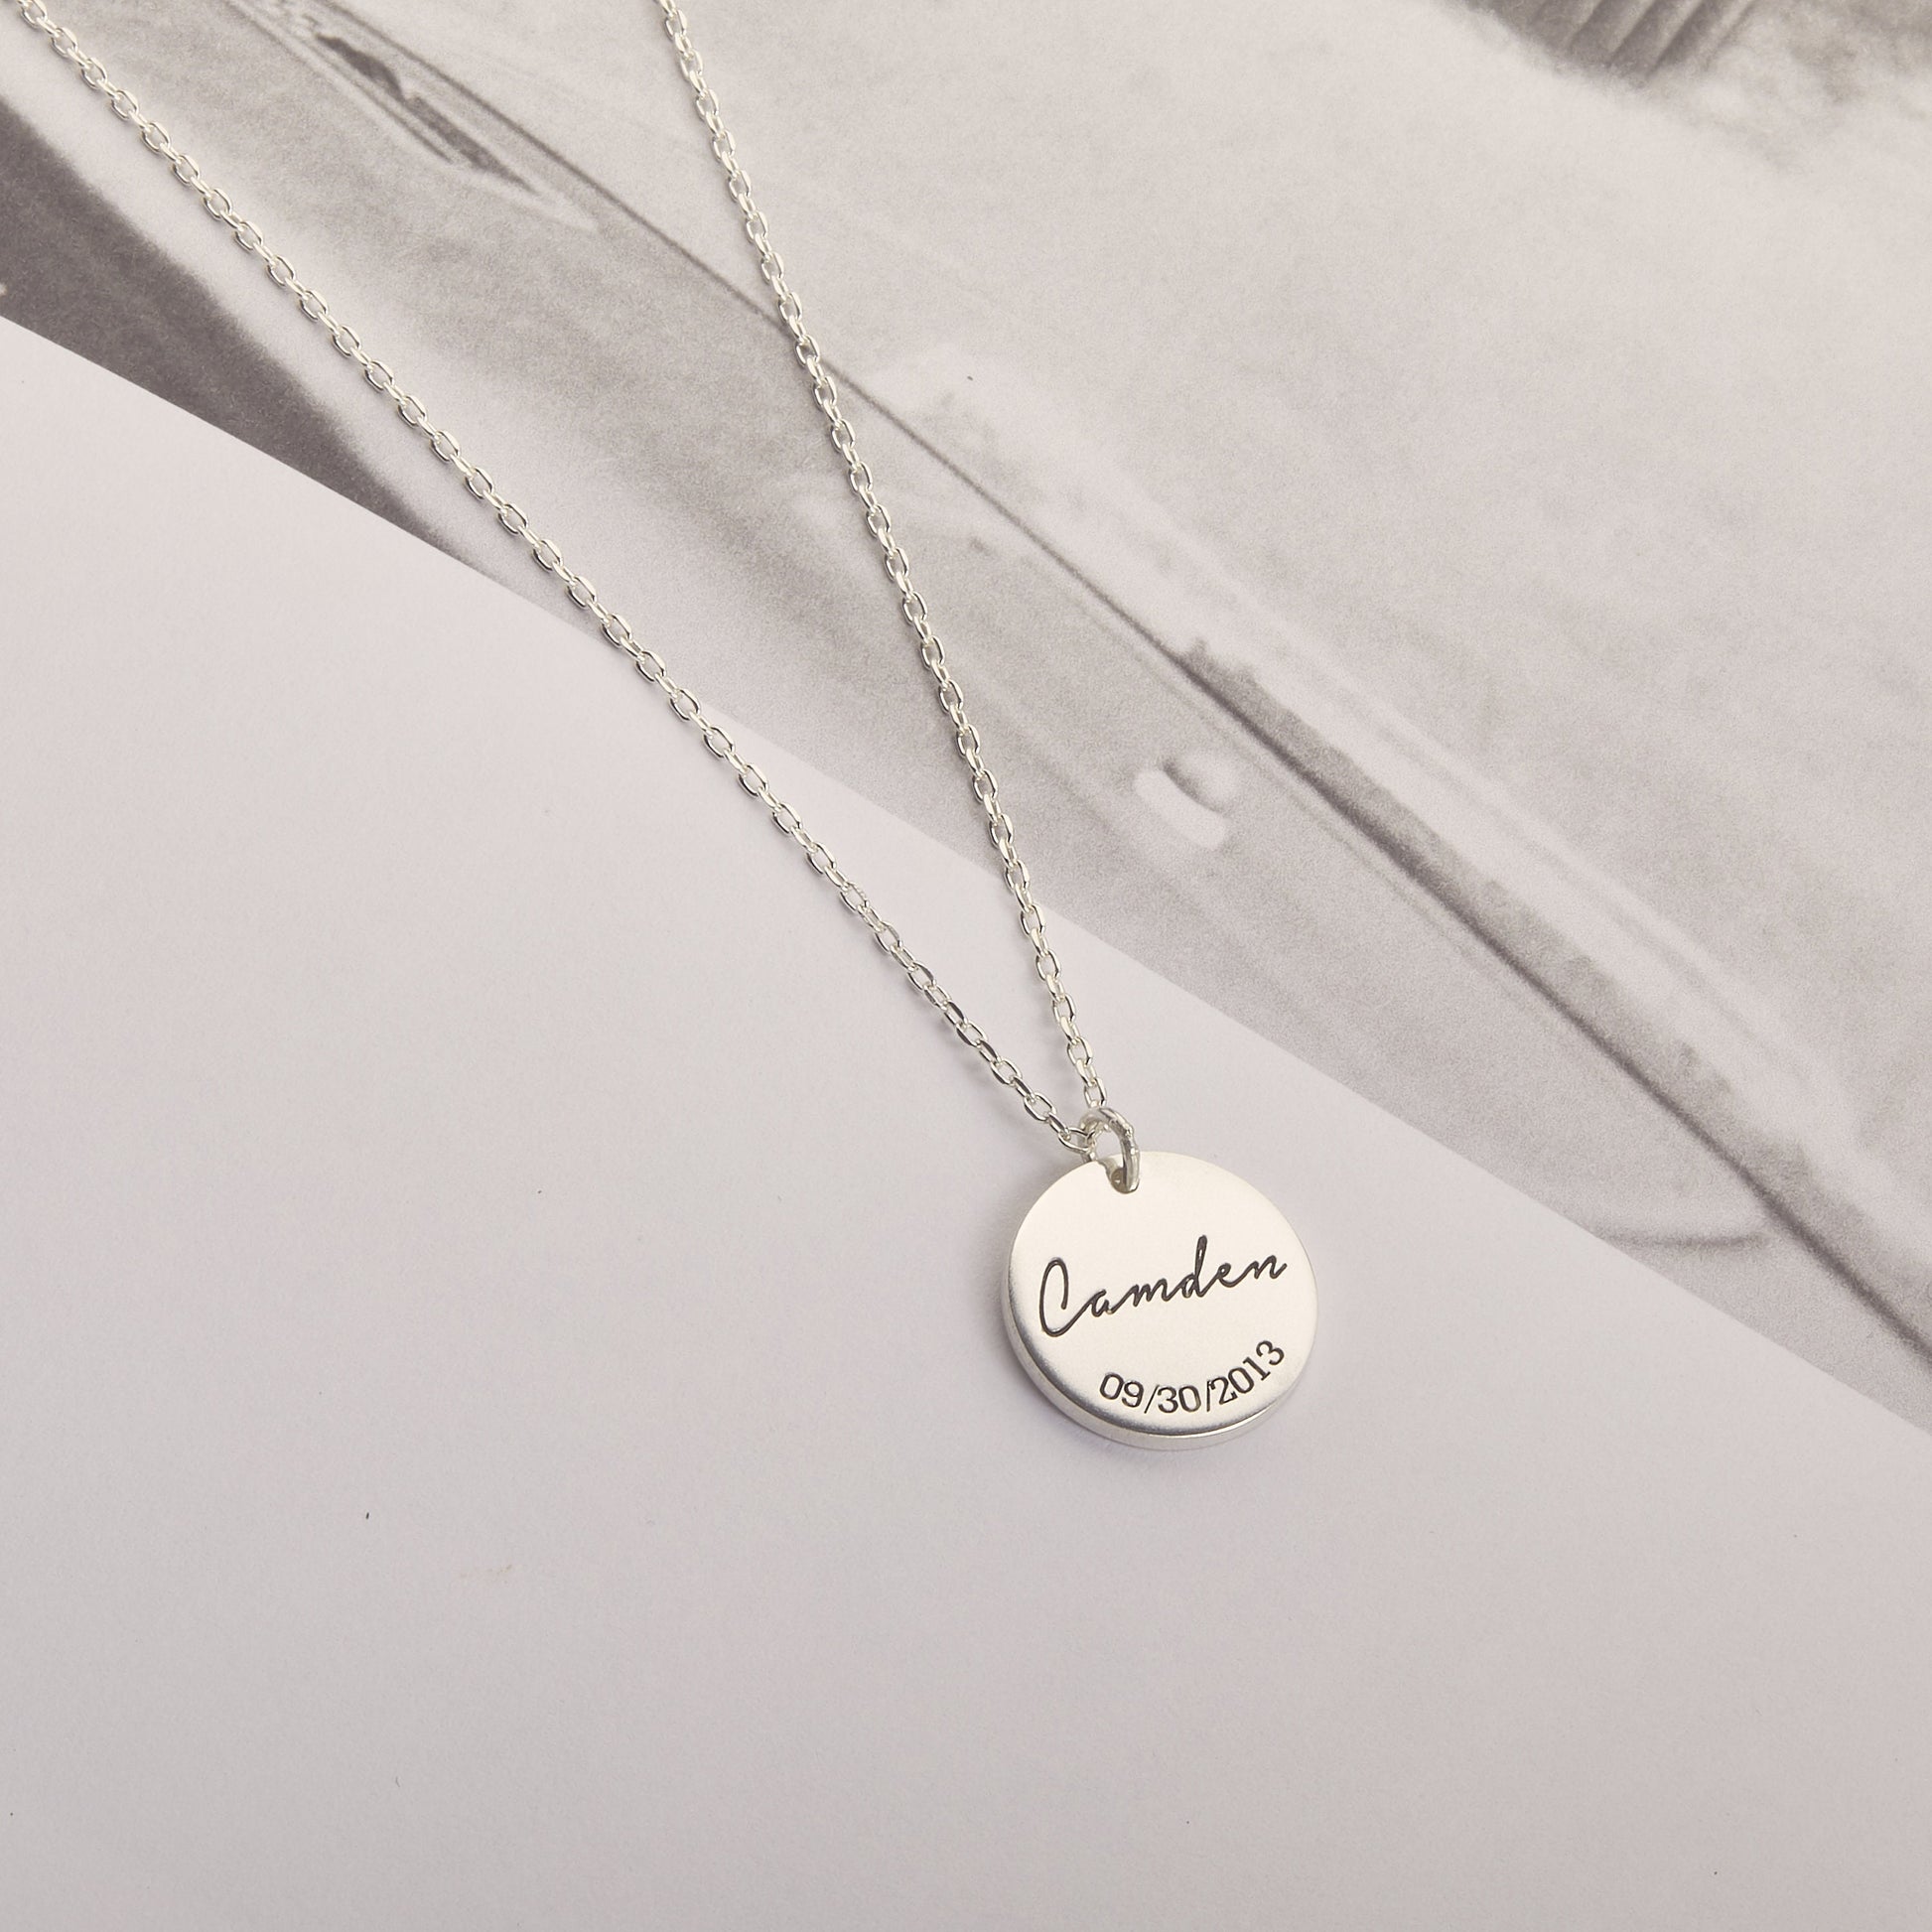 Thumbprint necklace | Handwriting Necklace | Memorial Necklace | Fingerprint Heart Necklace |  Signature necklace | Remembrance necklace